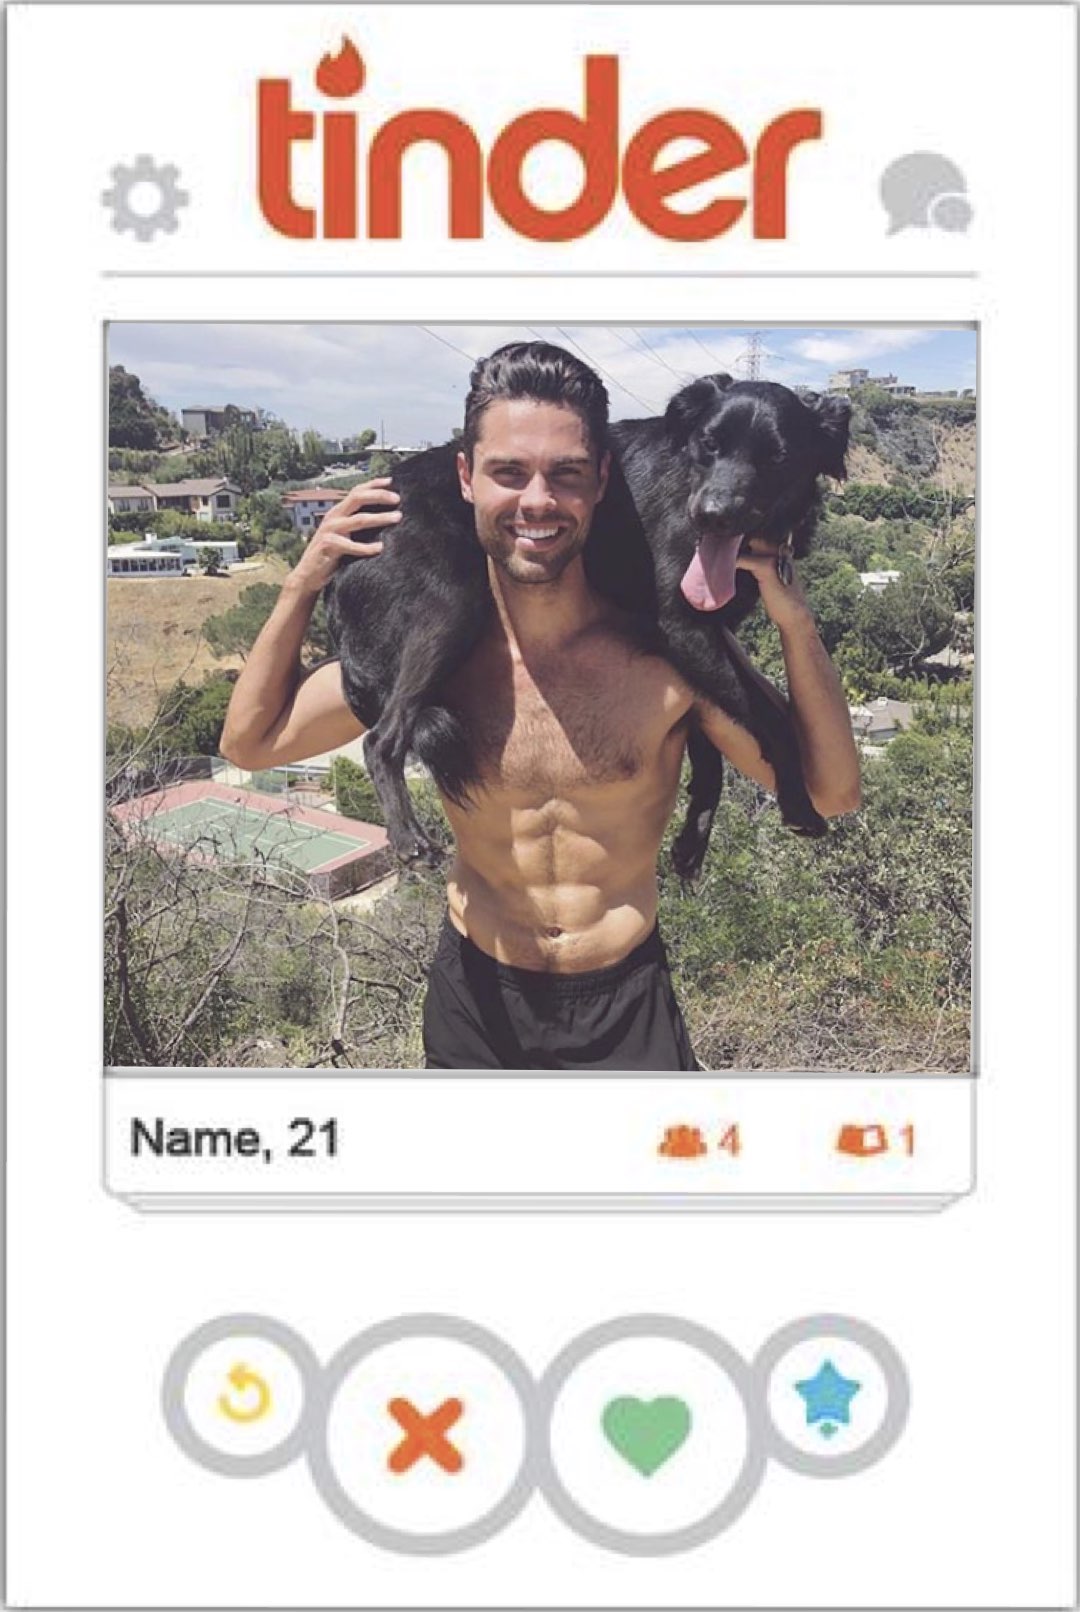 In it to win it: triple j listeners' guide to Tinder DOs and DON'Ts